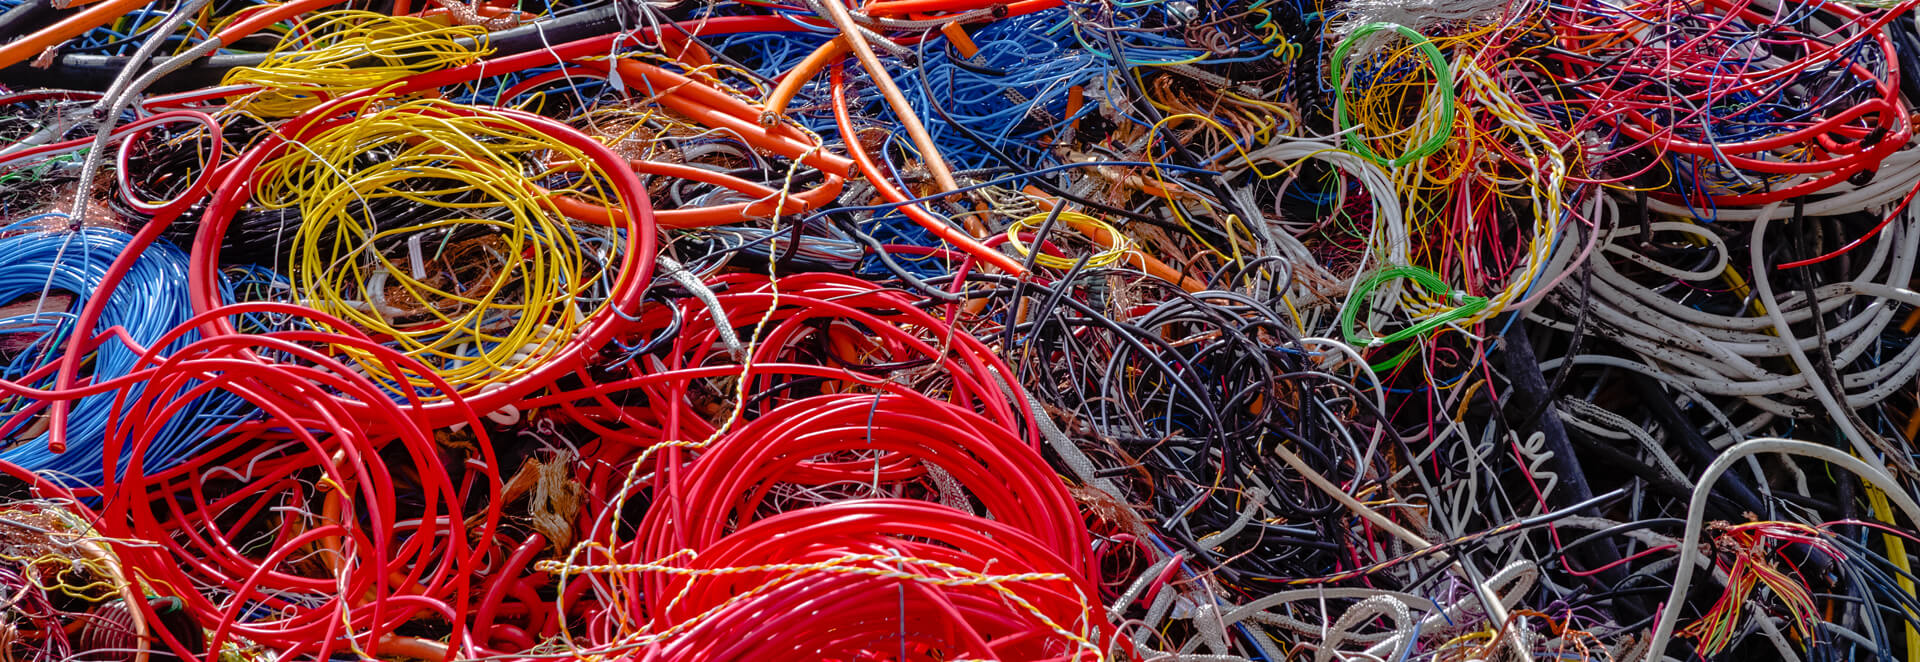 processing and recycling of electrical wires and cables